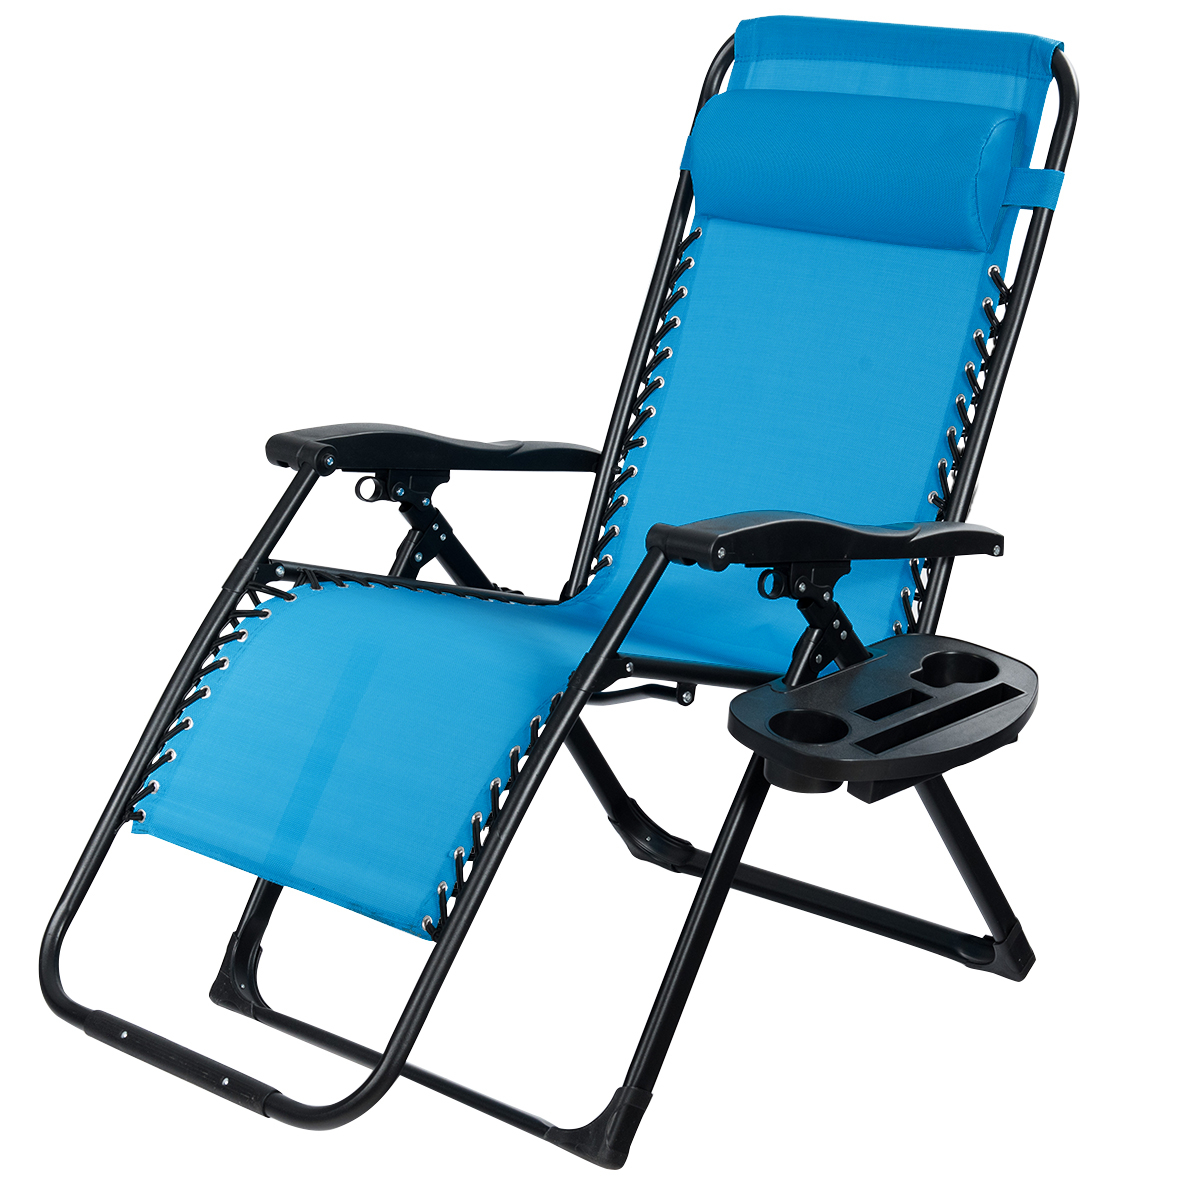 Gymax Folding Zero Gravity Lounge Chair Recliner W/ Cup Holder Tray Pillow - Blue